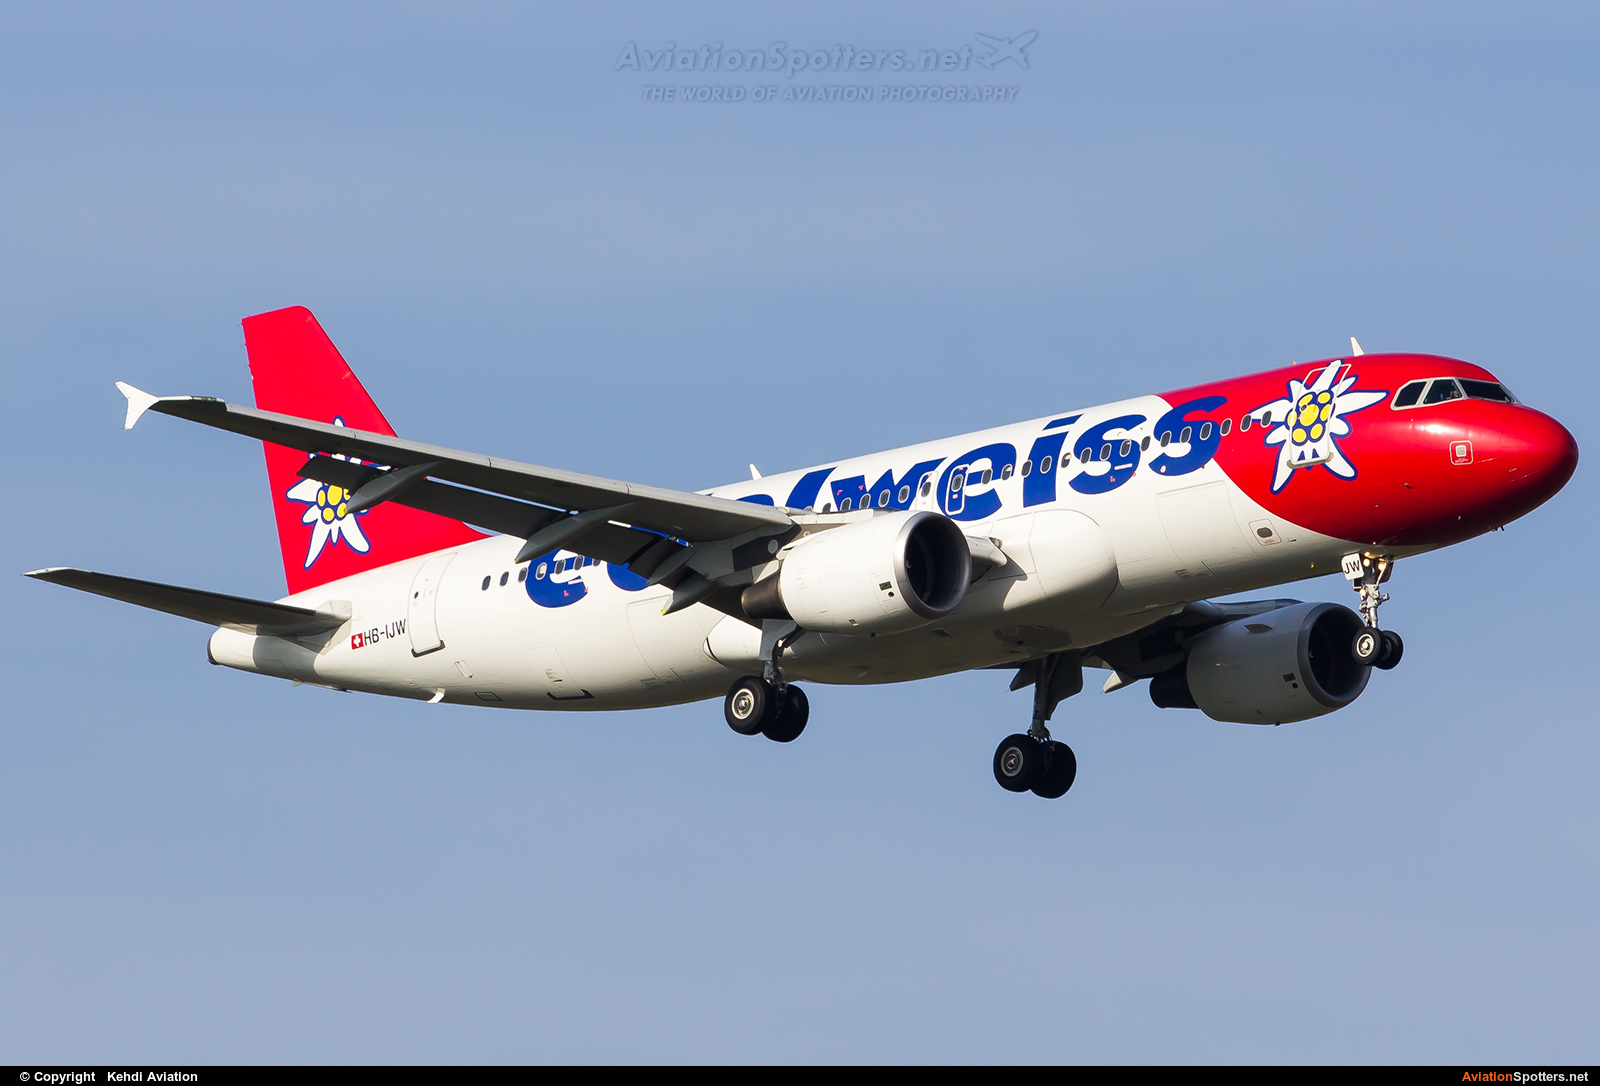 Edelweiss  -  A320-214  (HB-IJW) By Kehdi Aviation (Kehdi Aviation)